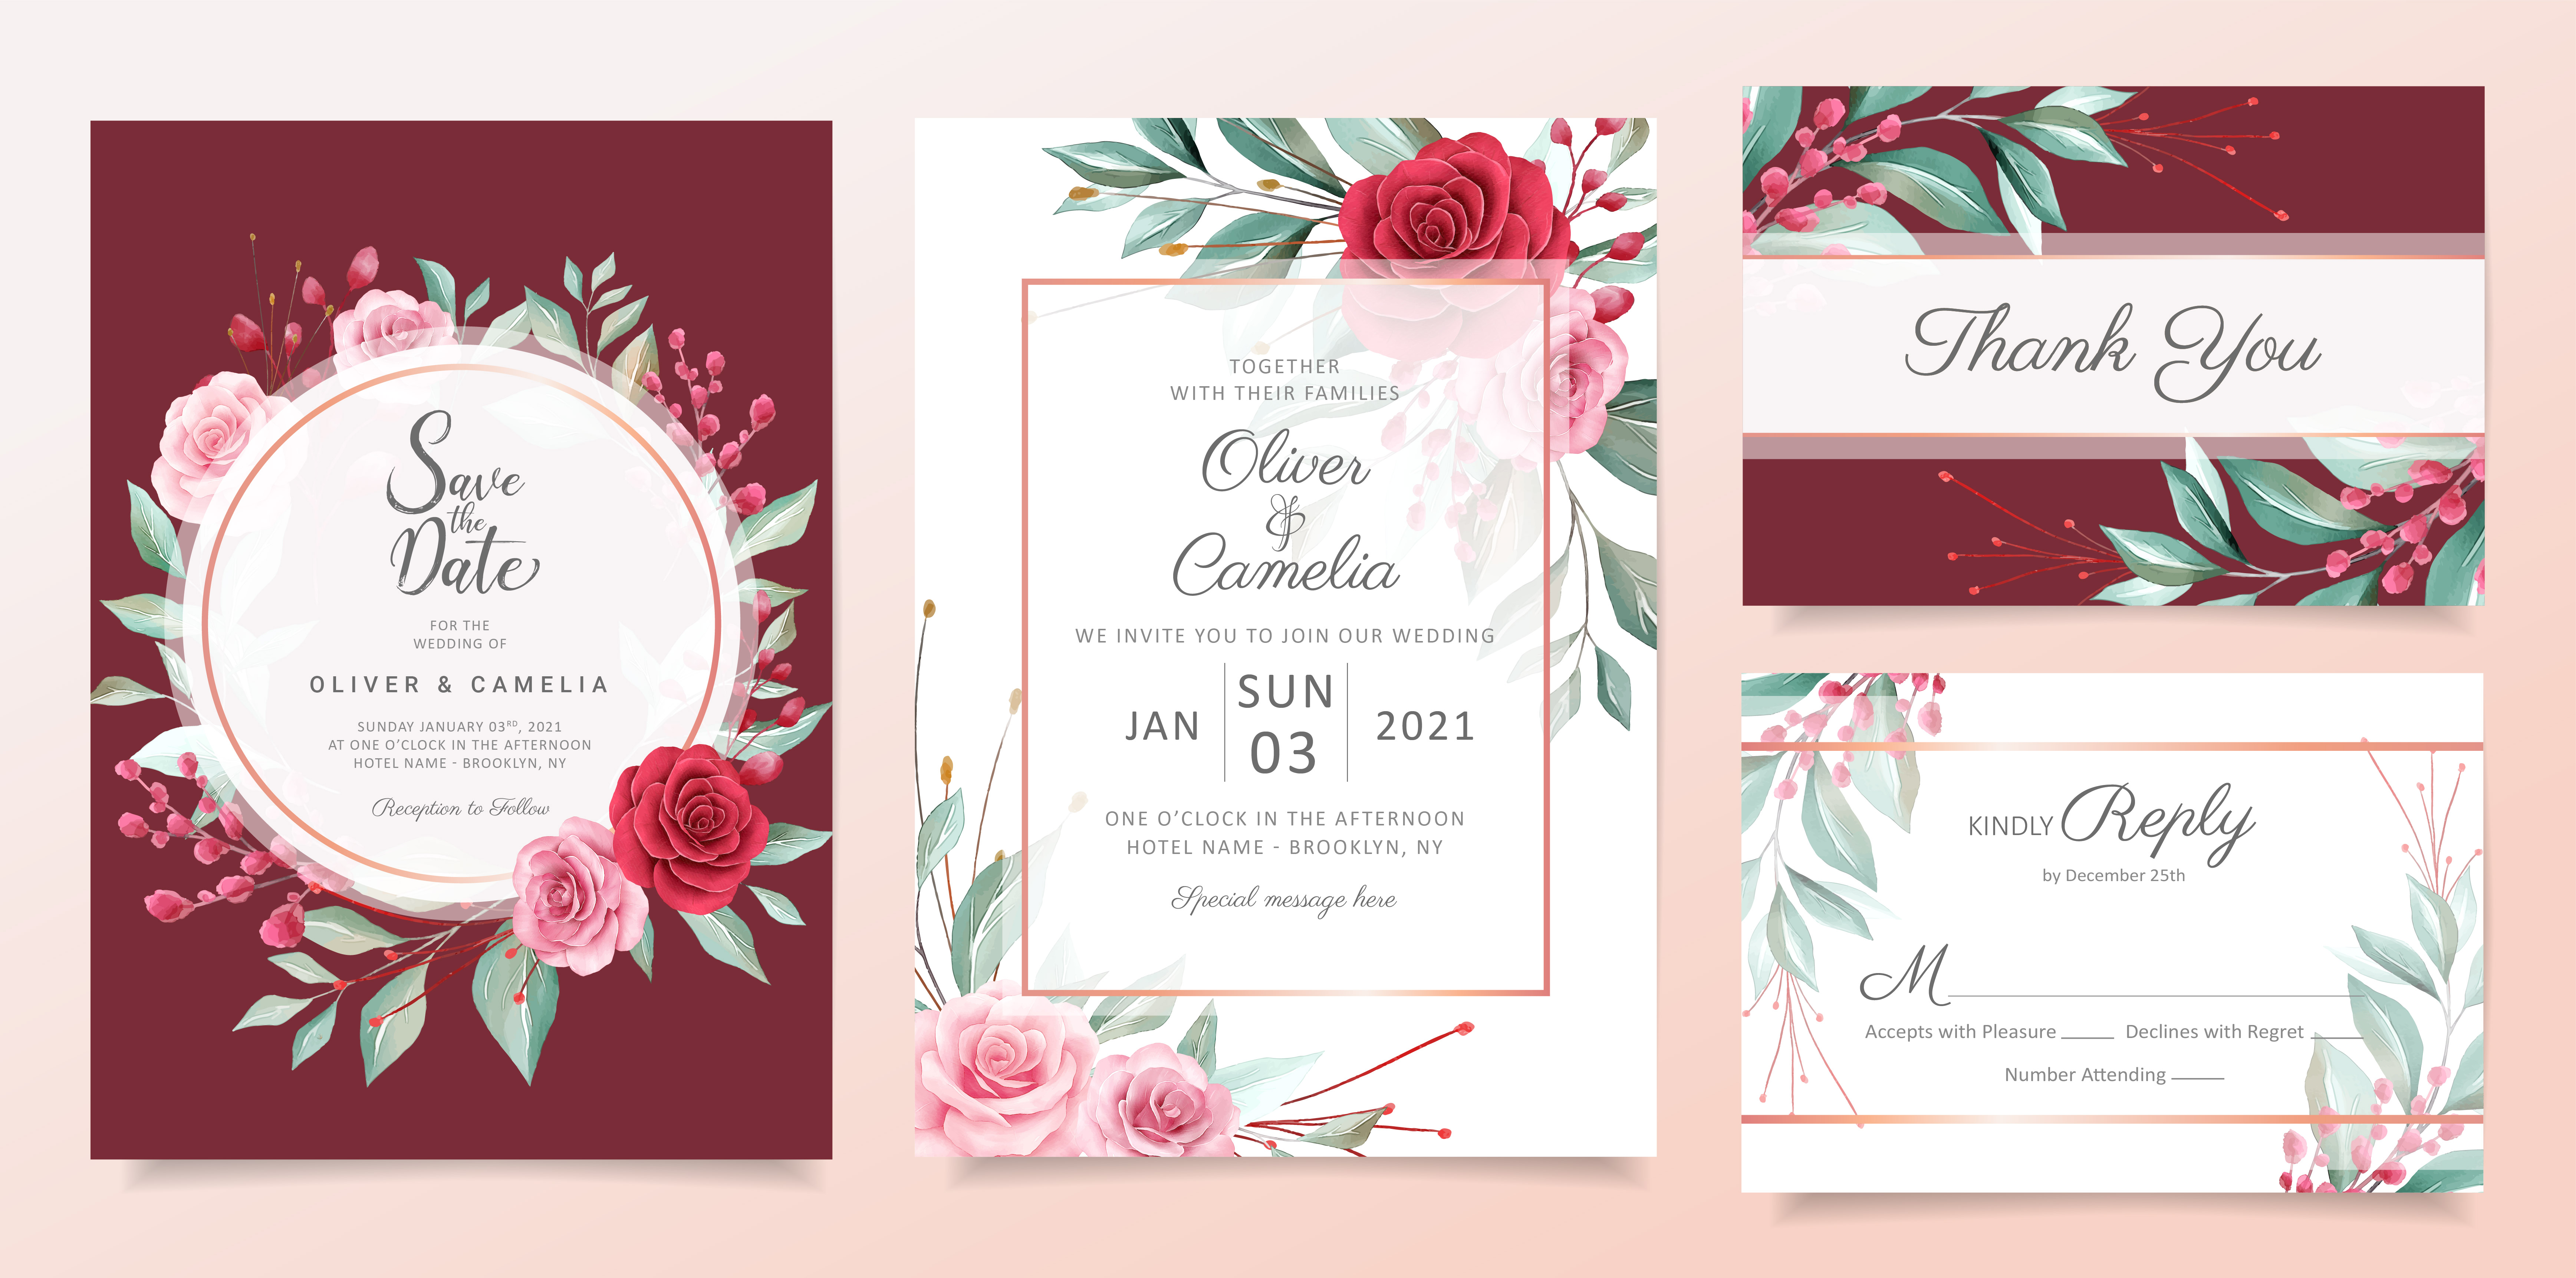 Red floral wedding invitation card template set with watercolor flowers